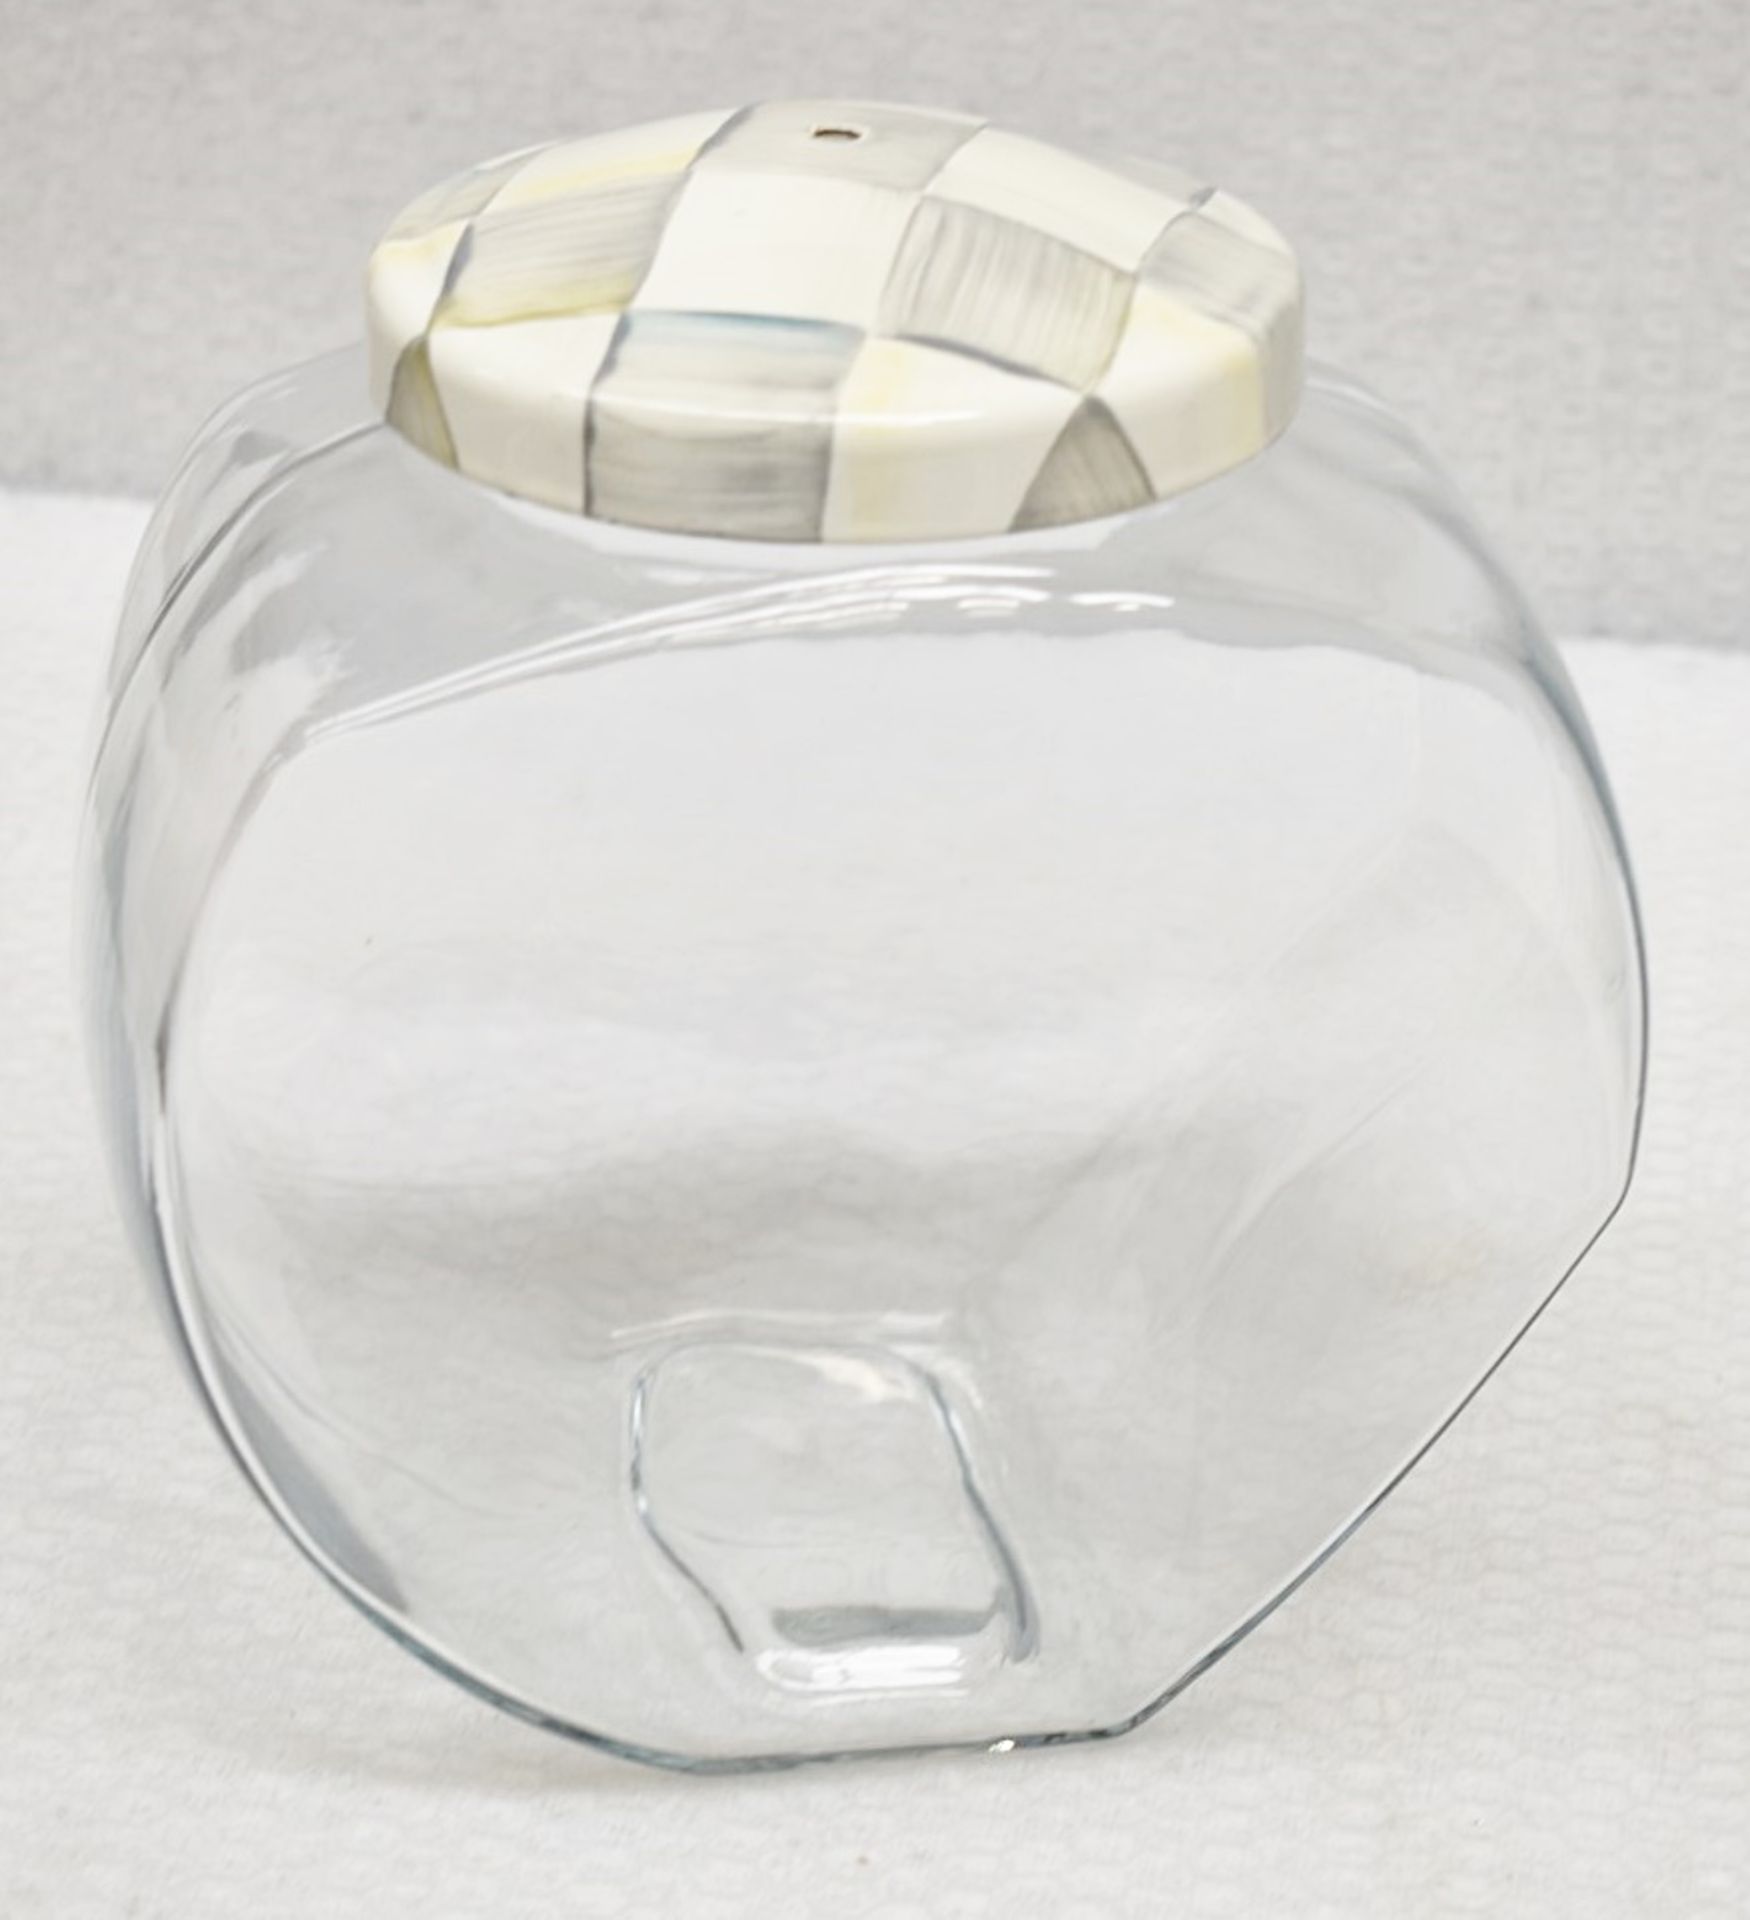 1 x MACKENZIE-CHILDS Sterling Check Cookie Jar With Enamelware Lid (20cm) - Original Price £94.95 - Image 9 of 12